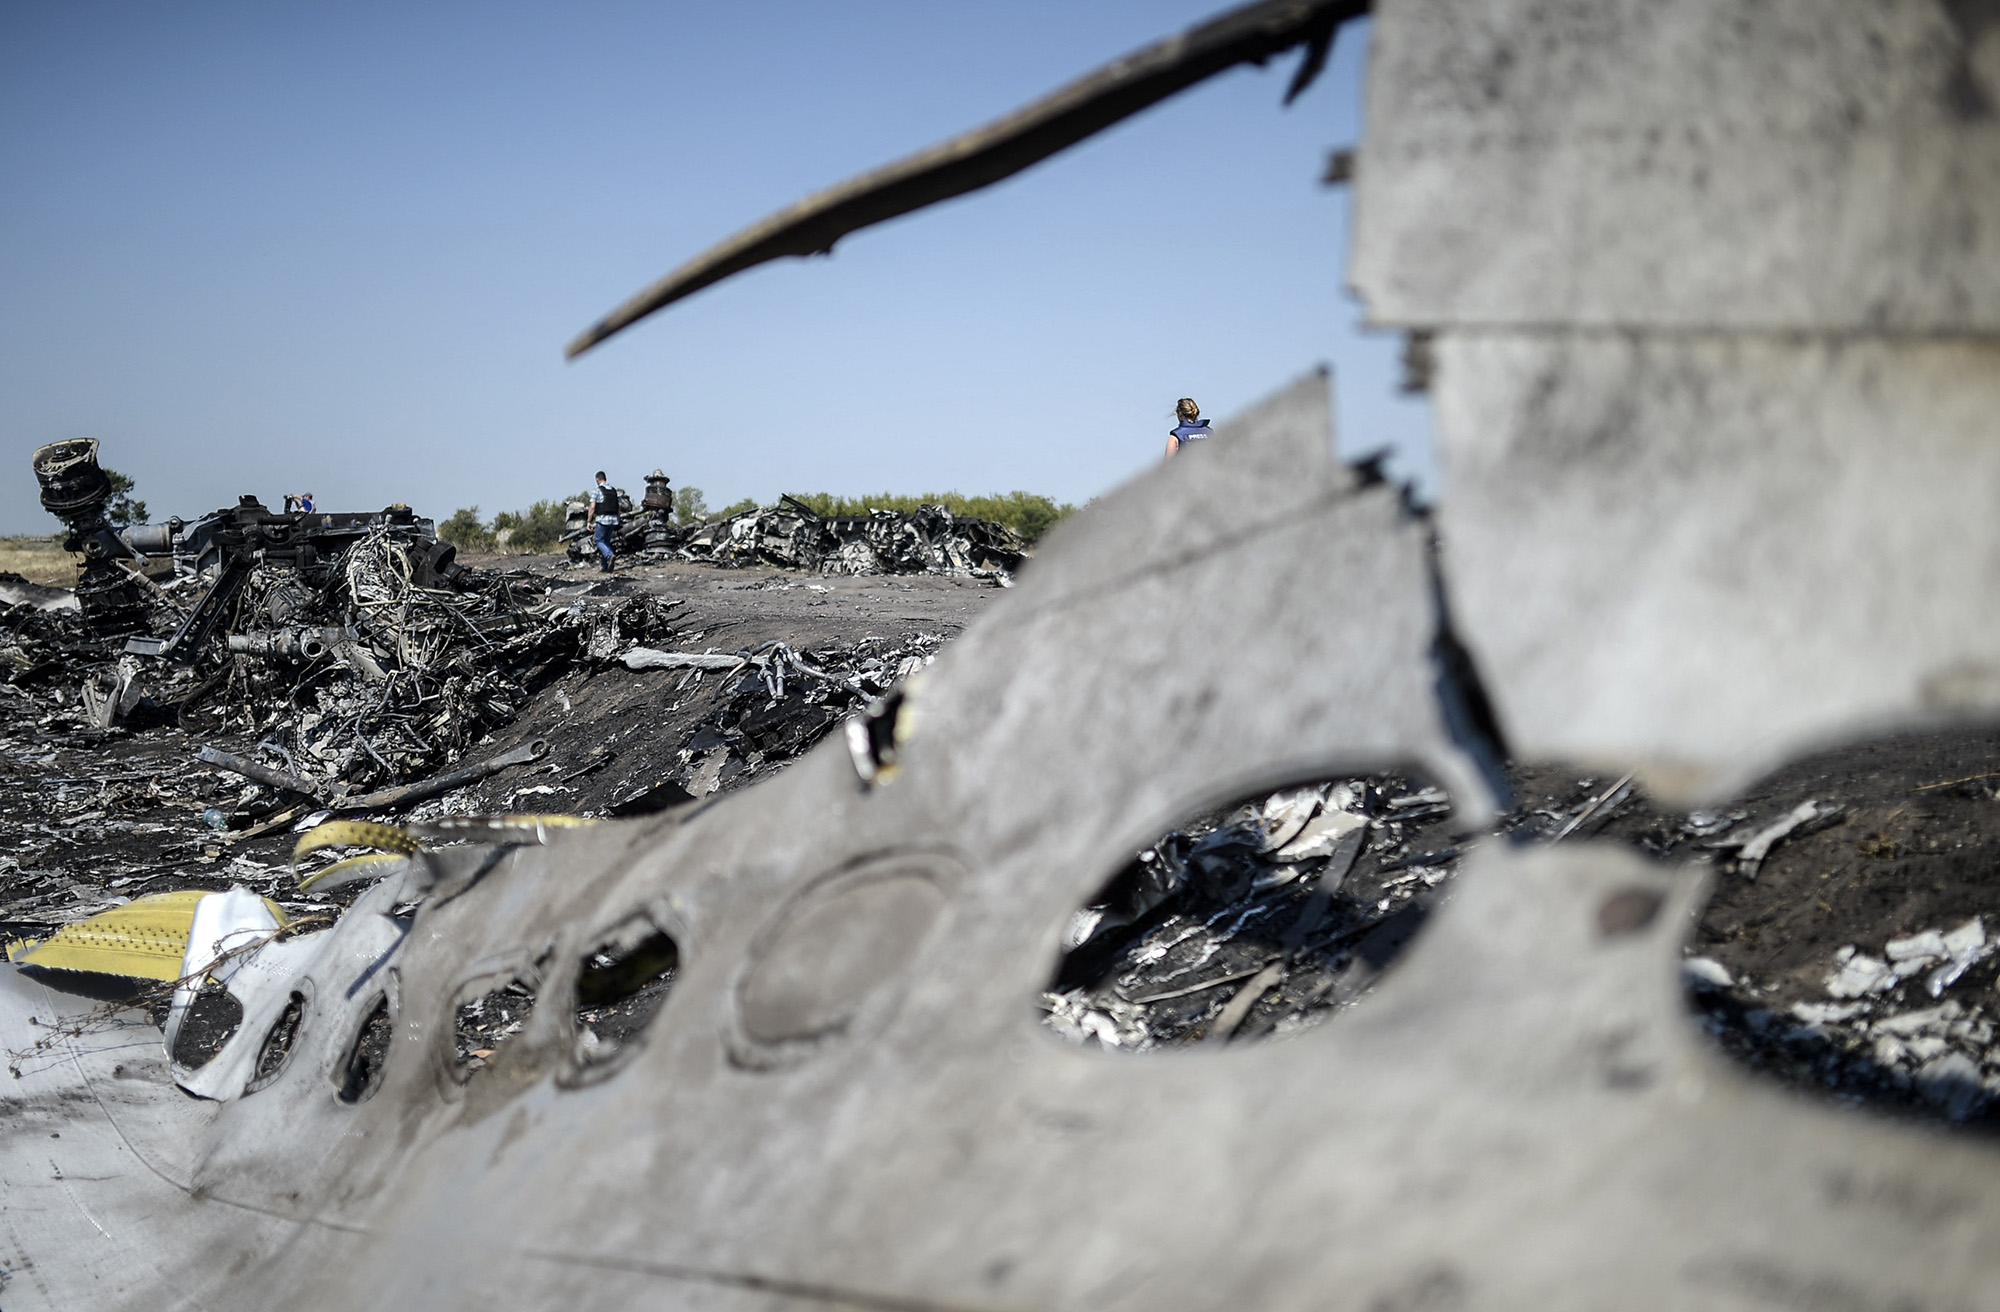 A part of the Malaysia Airlines Flight MH17 at the crash site in the village of Hrabove, some 80km east of Donetsk, Ukraine, on August 2, 2014